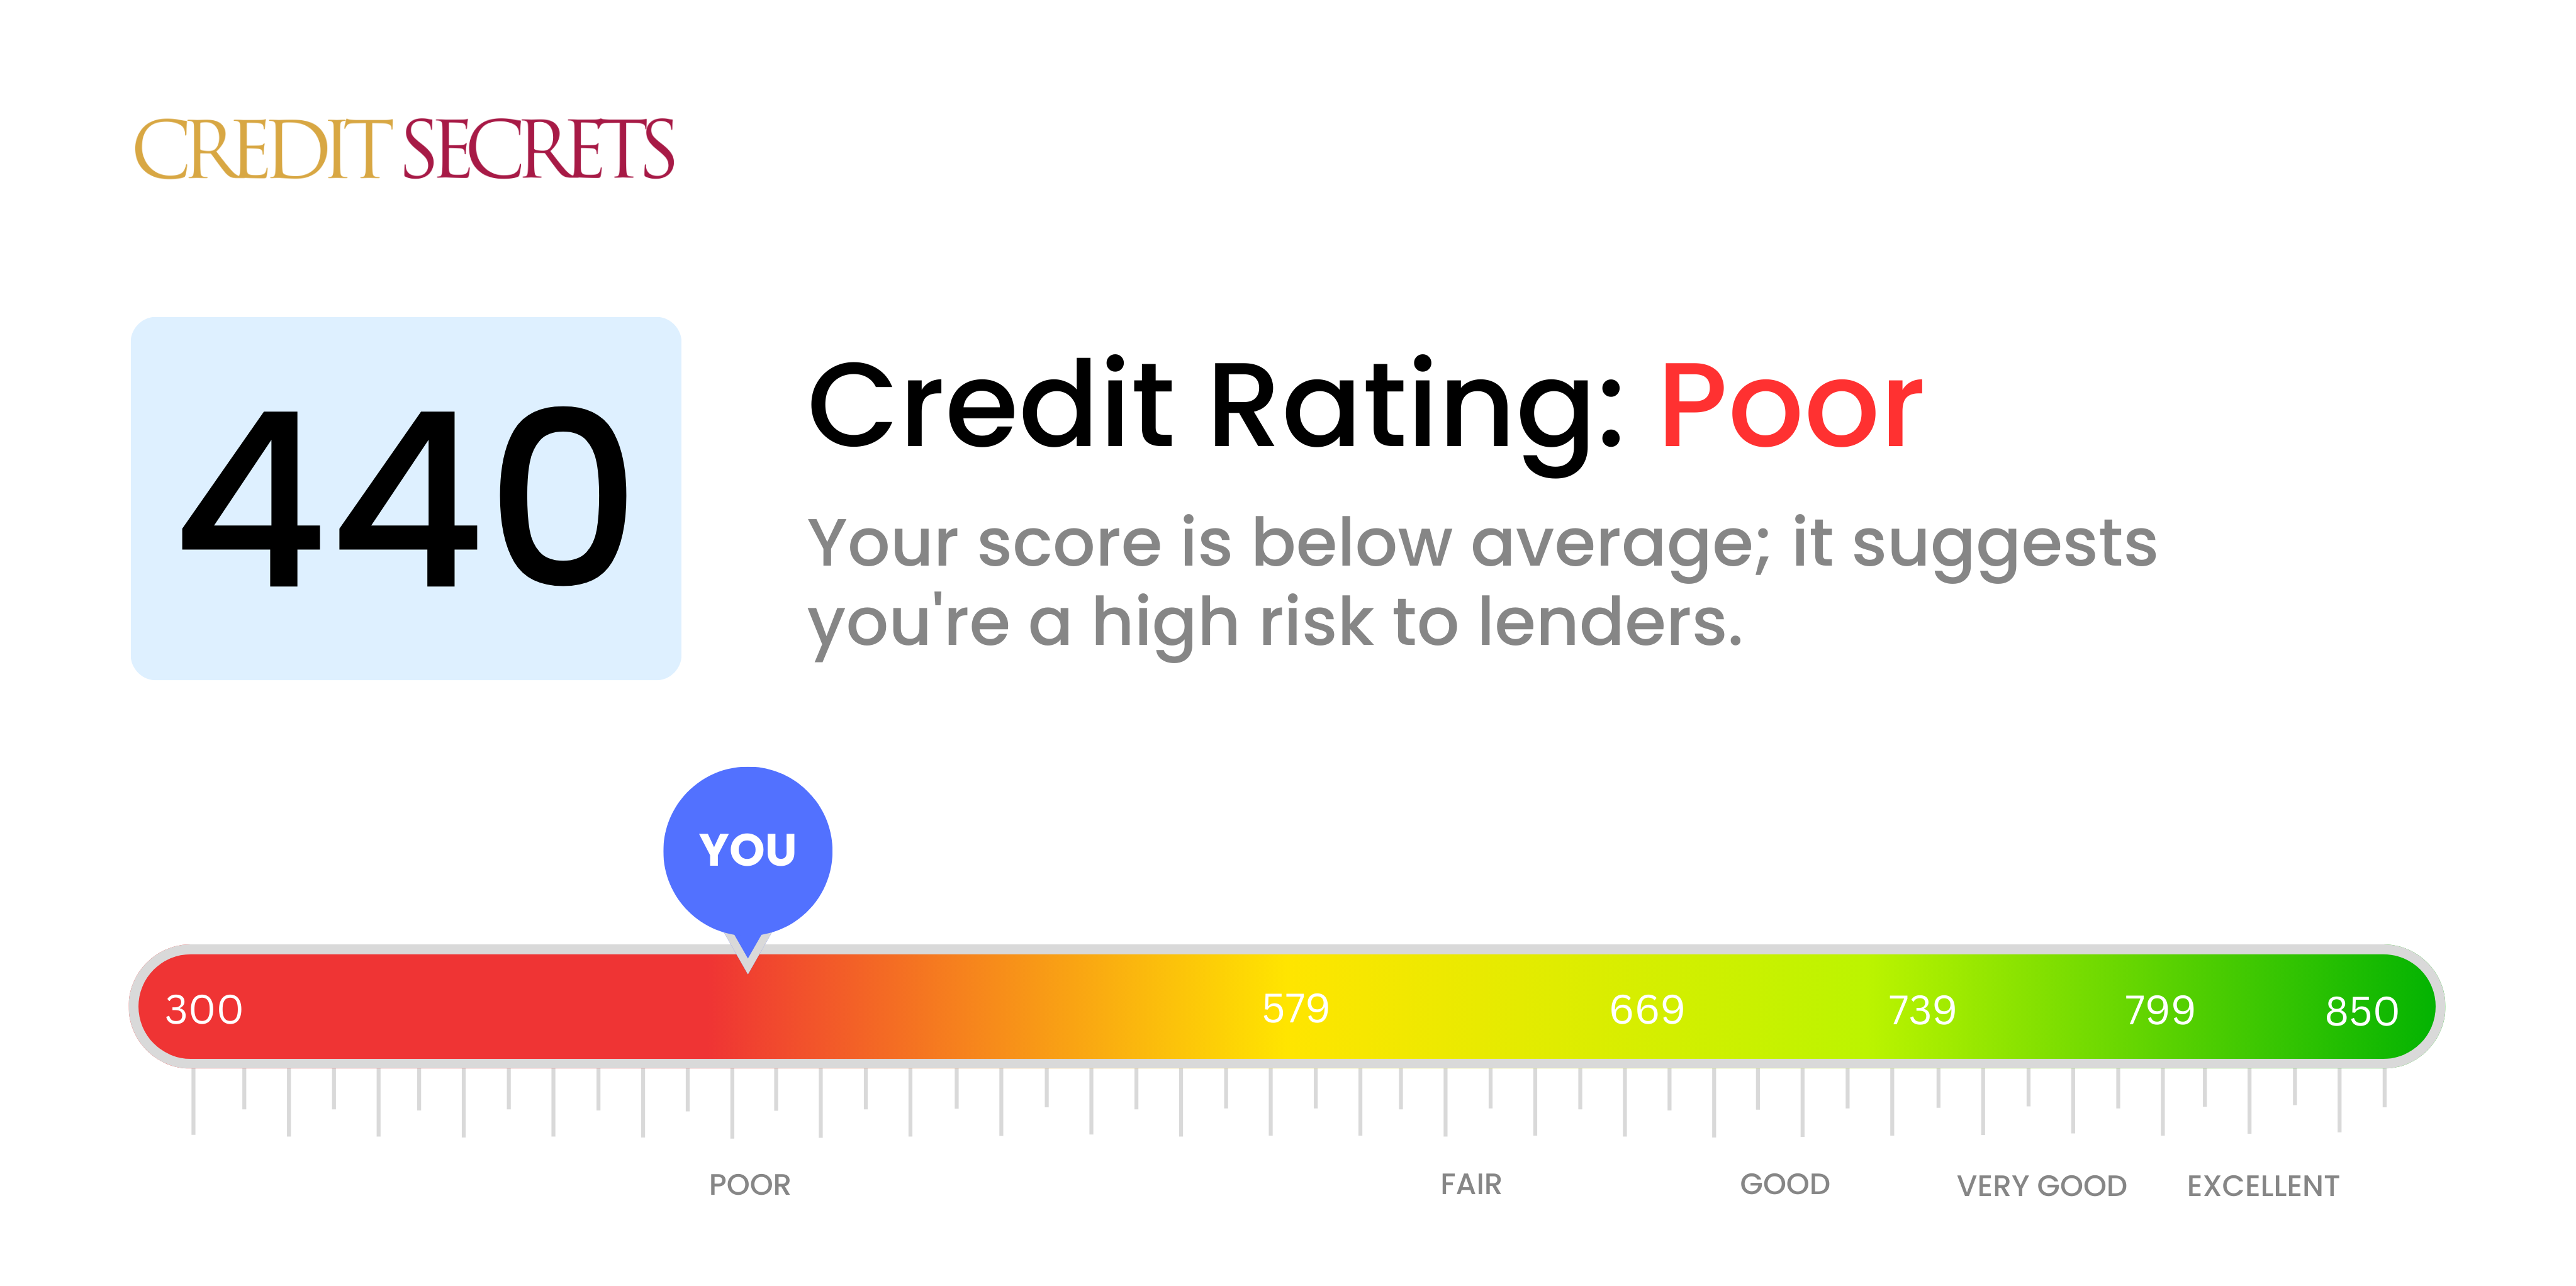 Is 440 a good credit score?